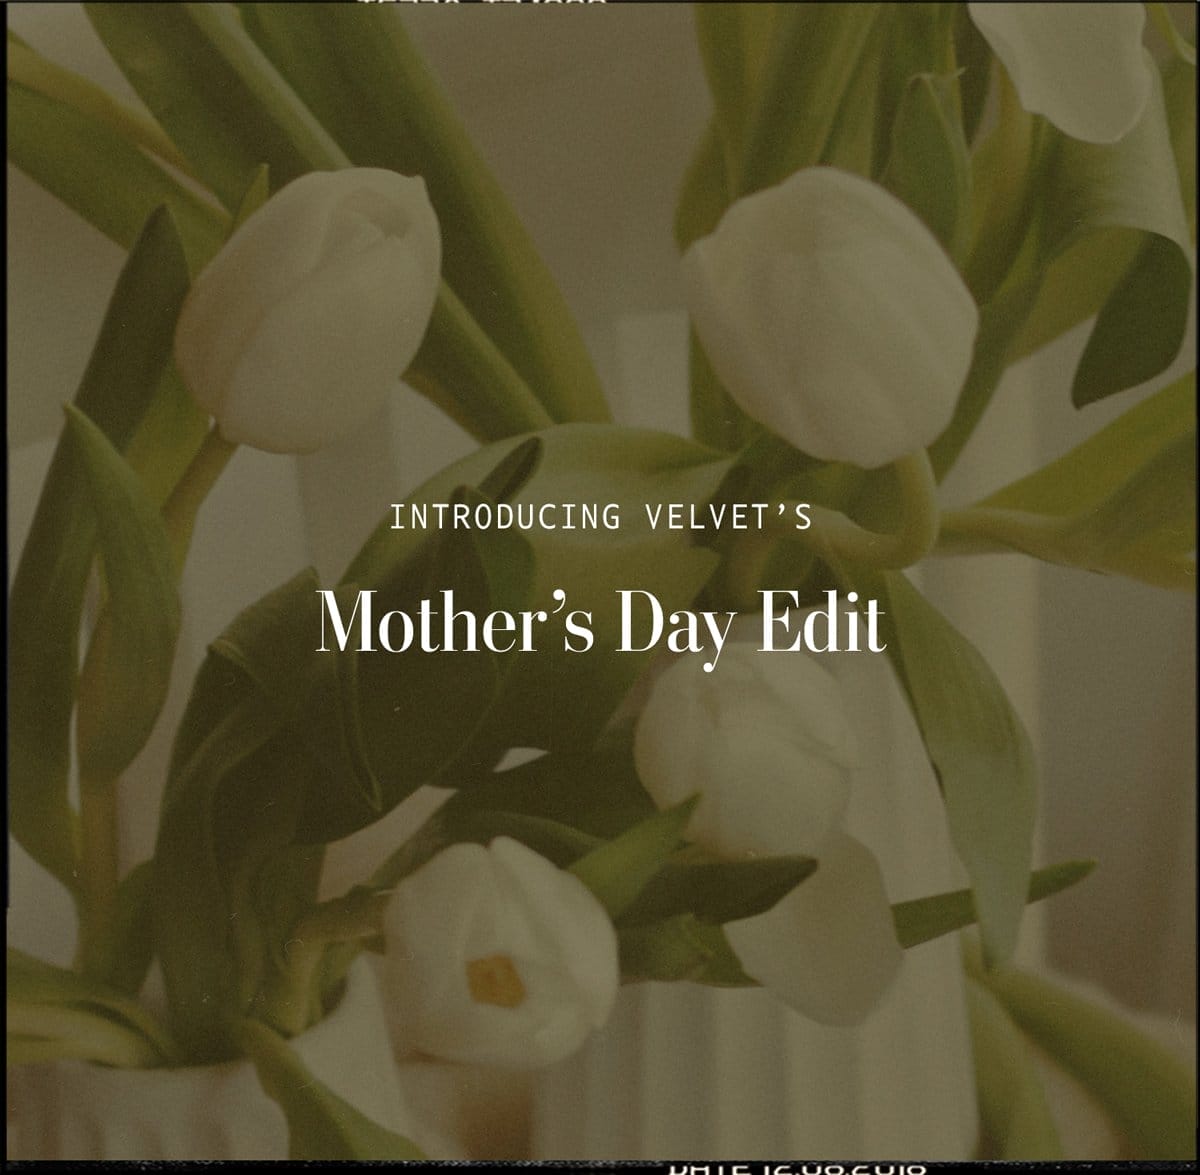 INTRODUCING VELVET'S Mother's Day Edit